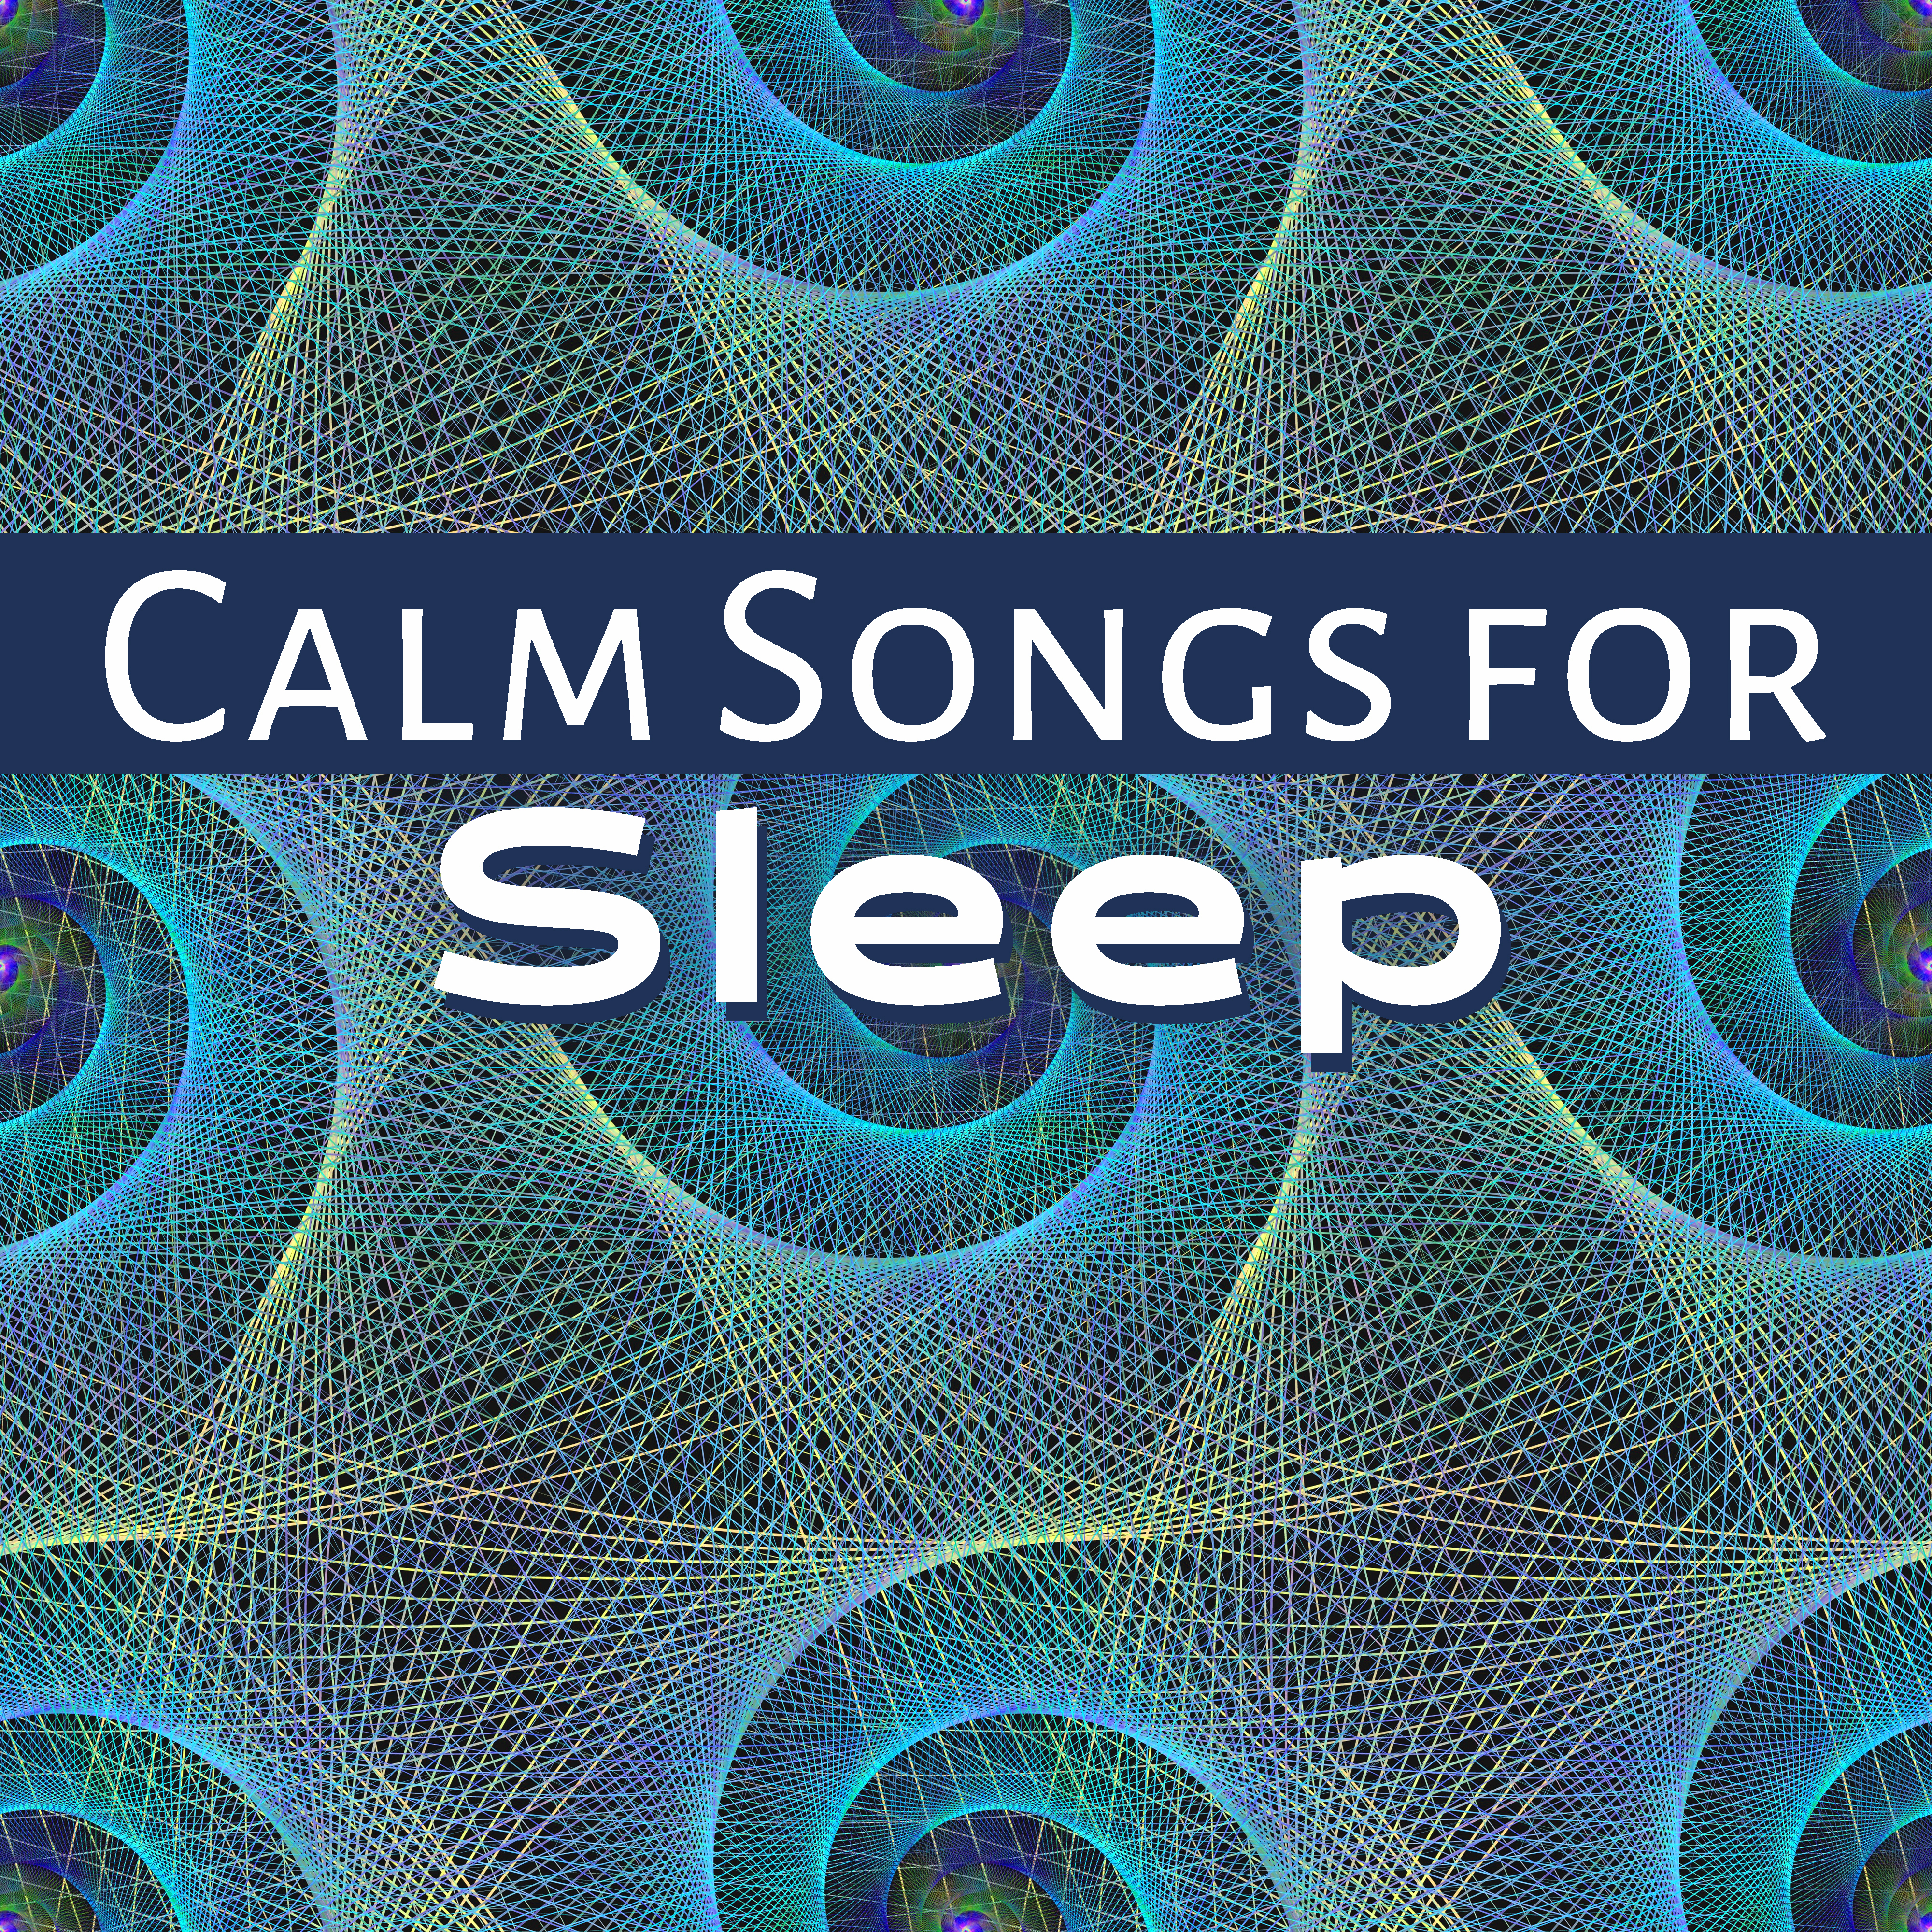 Calm Songs for Sleep – Stress Relief, Peaceful Sounds, Dream All Night, Sleeping Songs